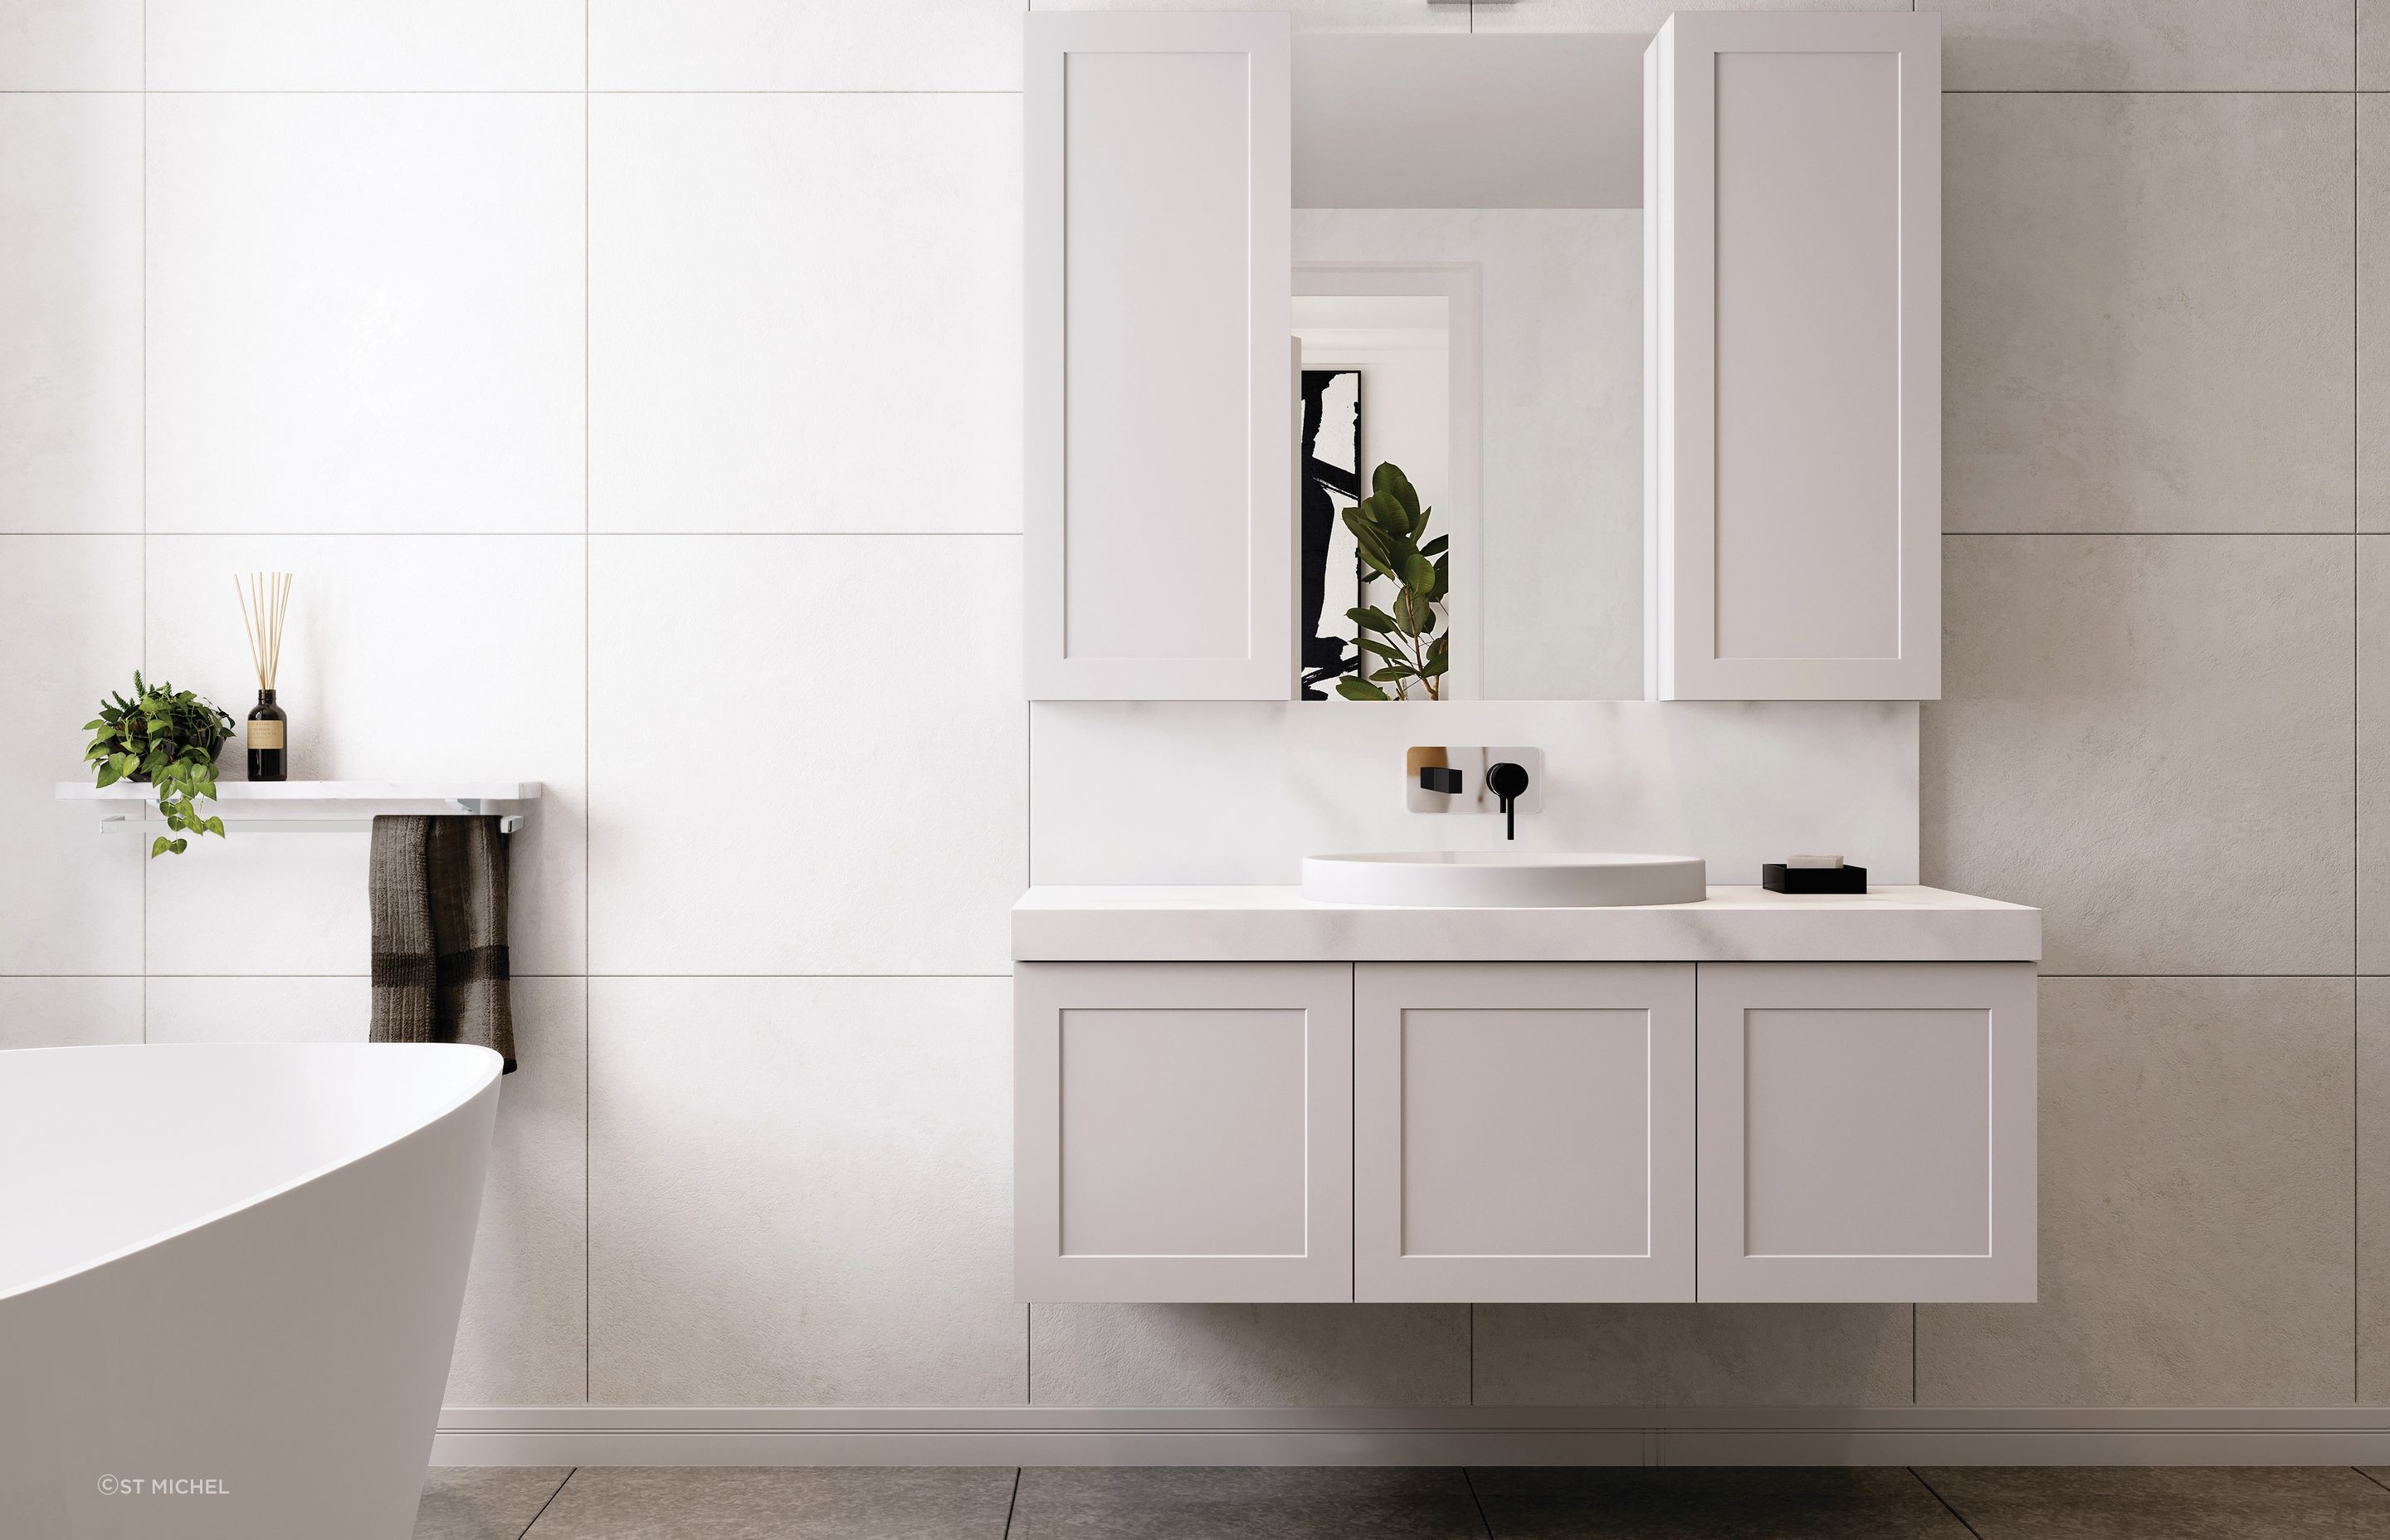 Floating vanities like the impeccable London Vanity help enhance the illusion of space.